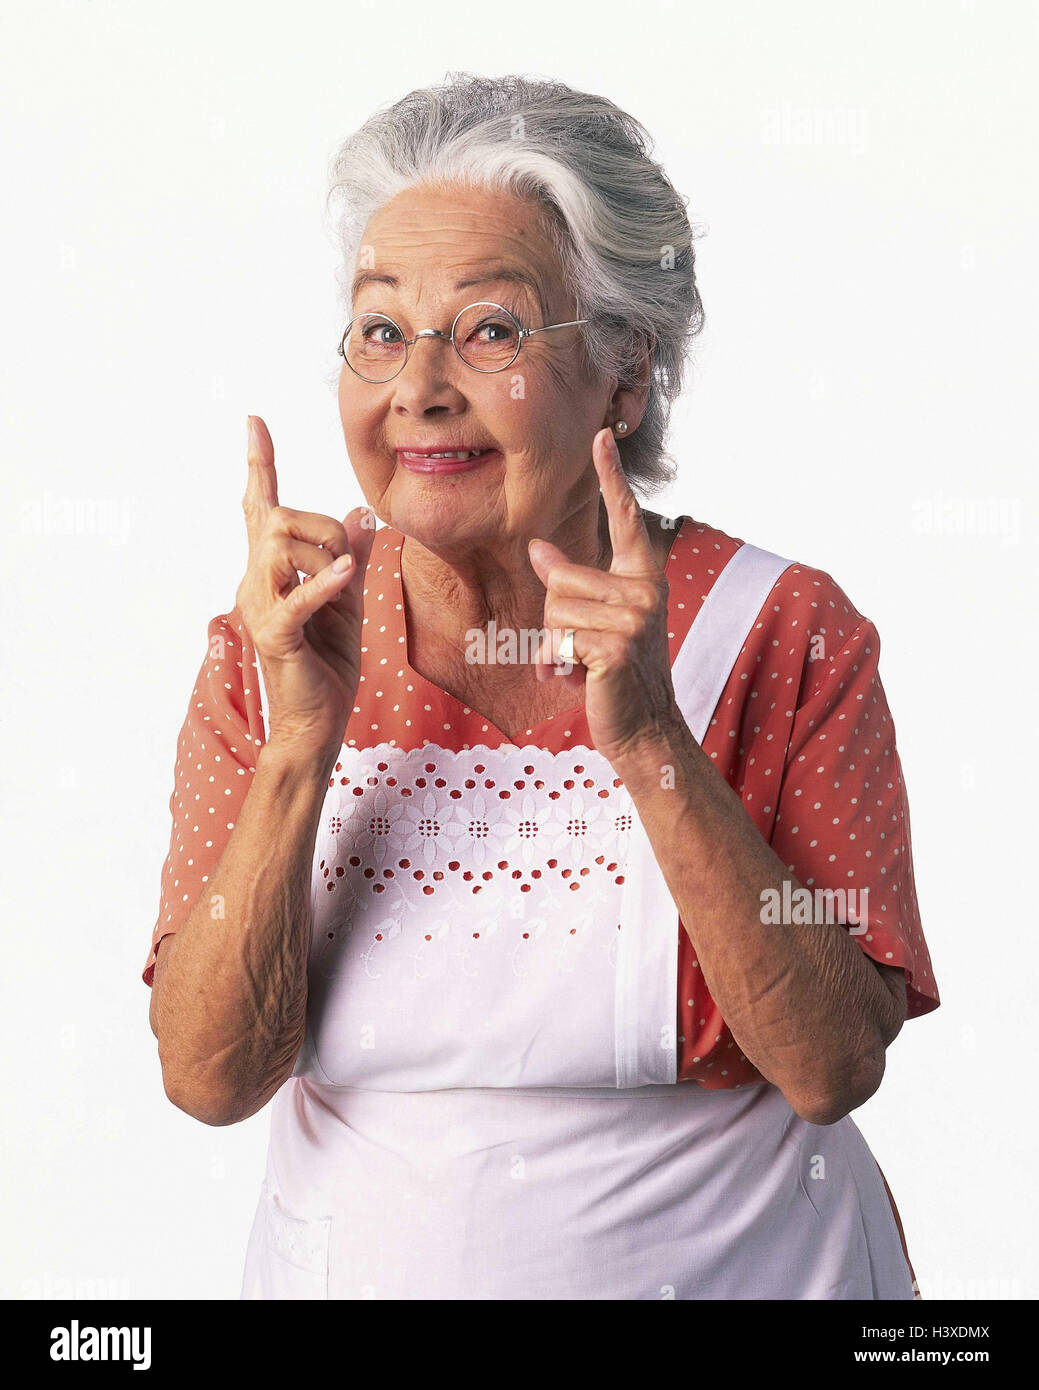 Senior, apron, gesture, finger, measurement, size display, half portrait, Senior, inside, cut out, woman, old, hairs, grey, glasses, granny, housewife, smile, indicate distance, studio, Stock Photo